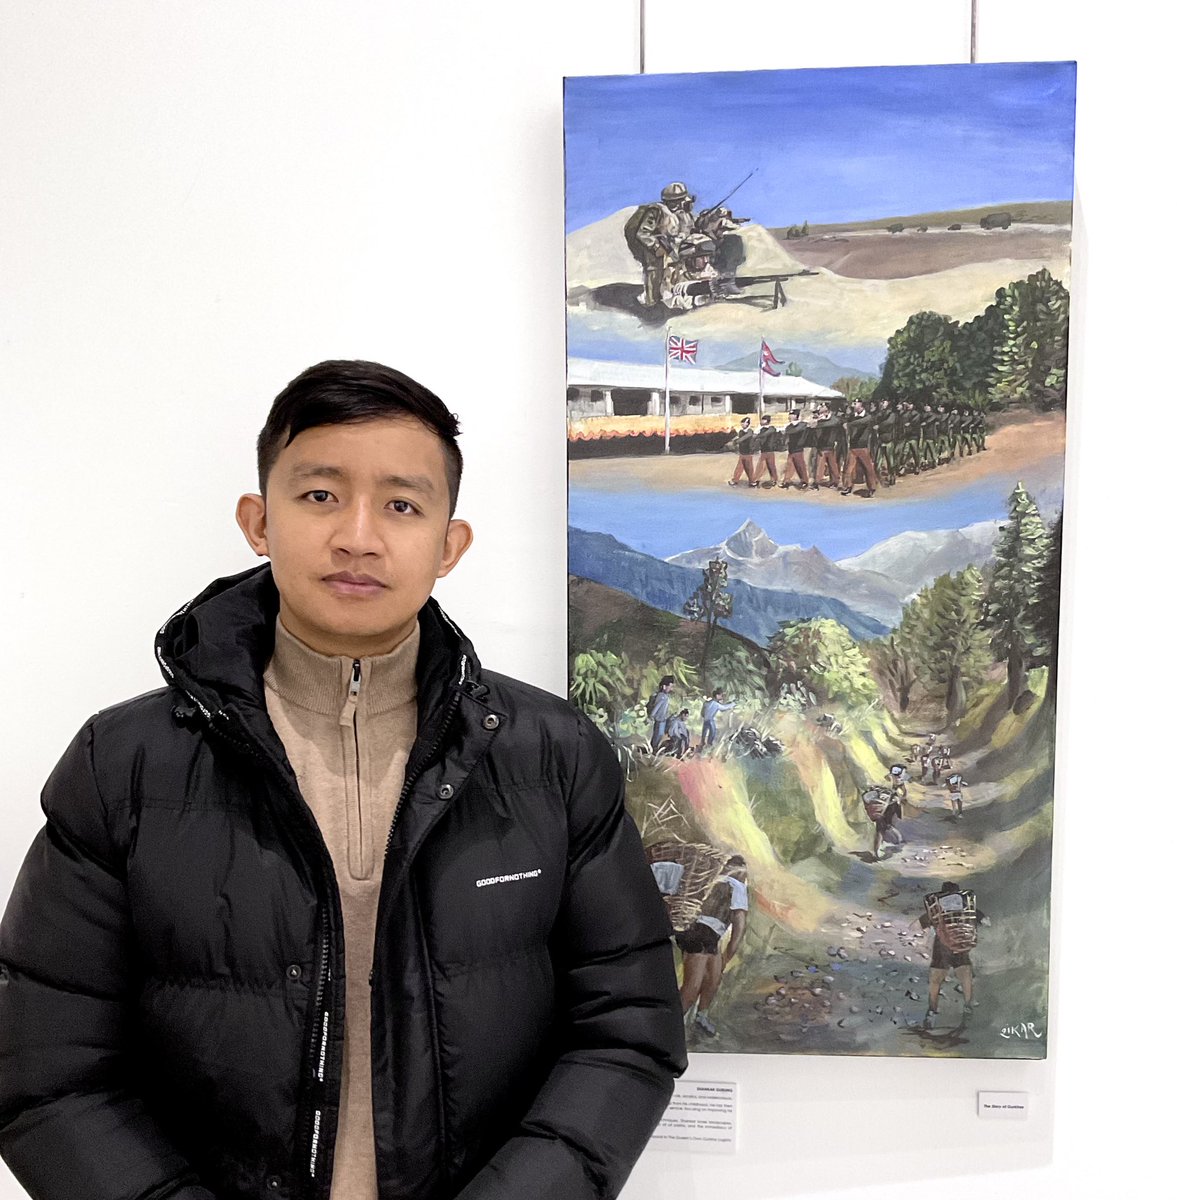 Serving soldier LCpl Shankar has been setting up his painting in @MorayArtCentre ahead of the exhibition tomorrow. ‘ The Story of the #Gurkha’ will be familiar to many in the @Gurkha_Brigade. This painting is alongside work from @MorayCollege & #military & civilian #artists.